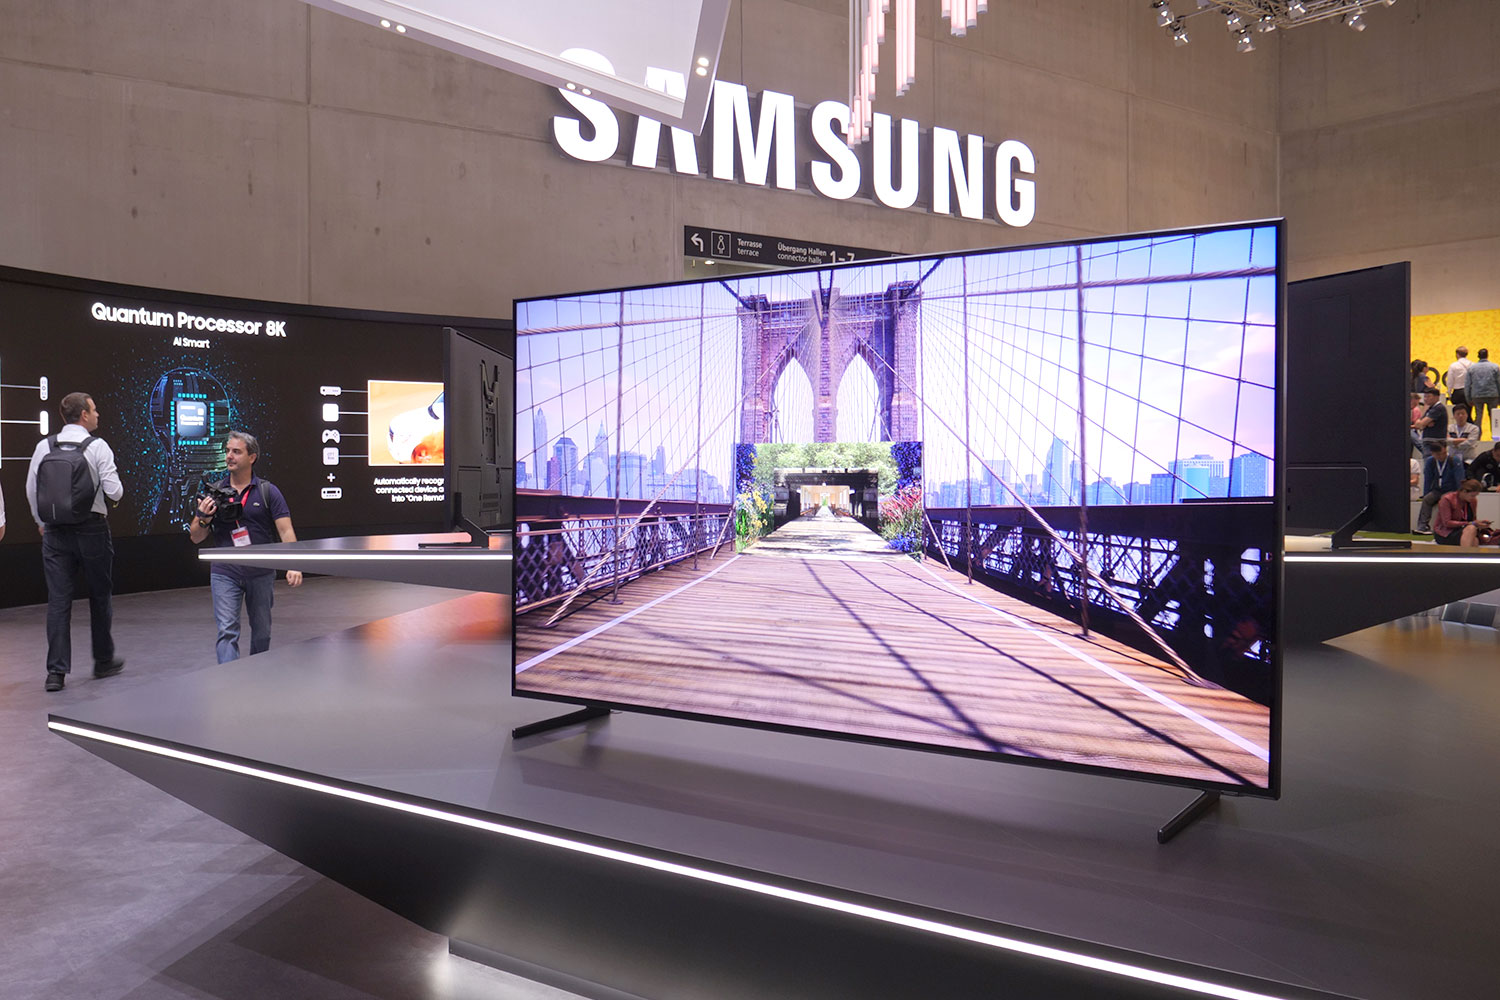 A photo showing a Samsung QLED TV in a brightly lit environment.